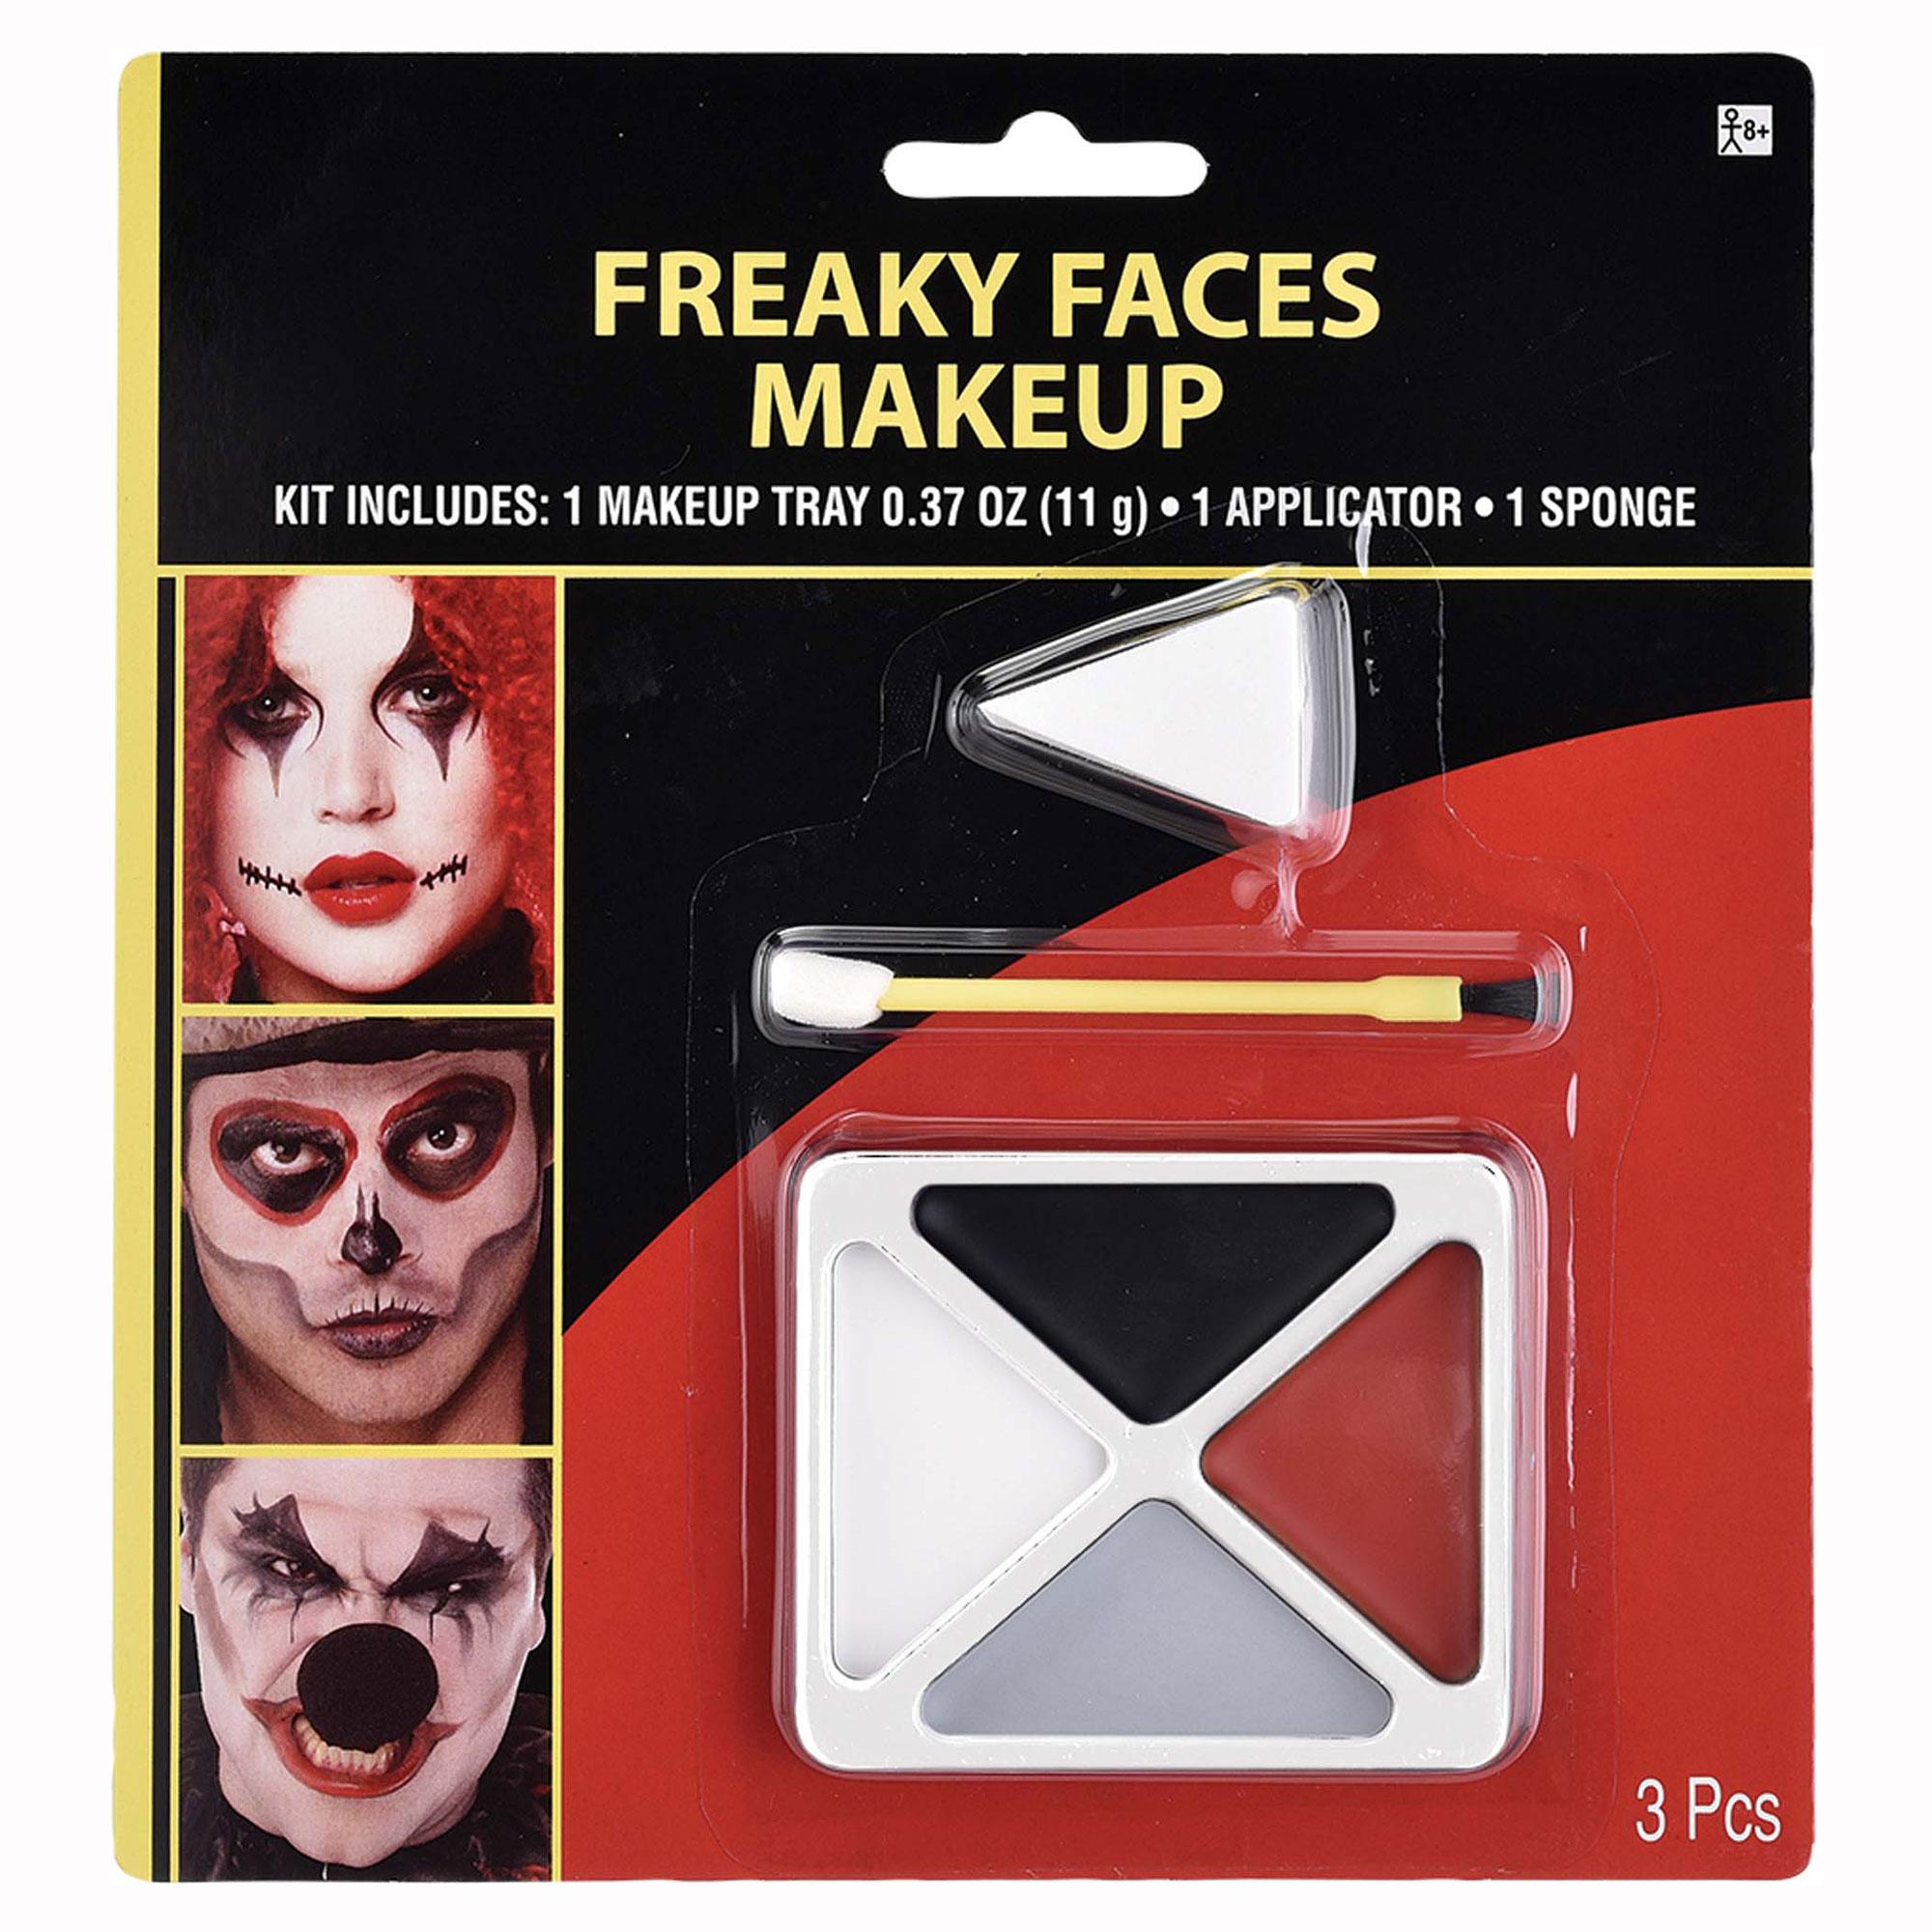 Freaky Faces Makeup Kit Costumes & Apparel - Party Centre